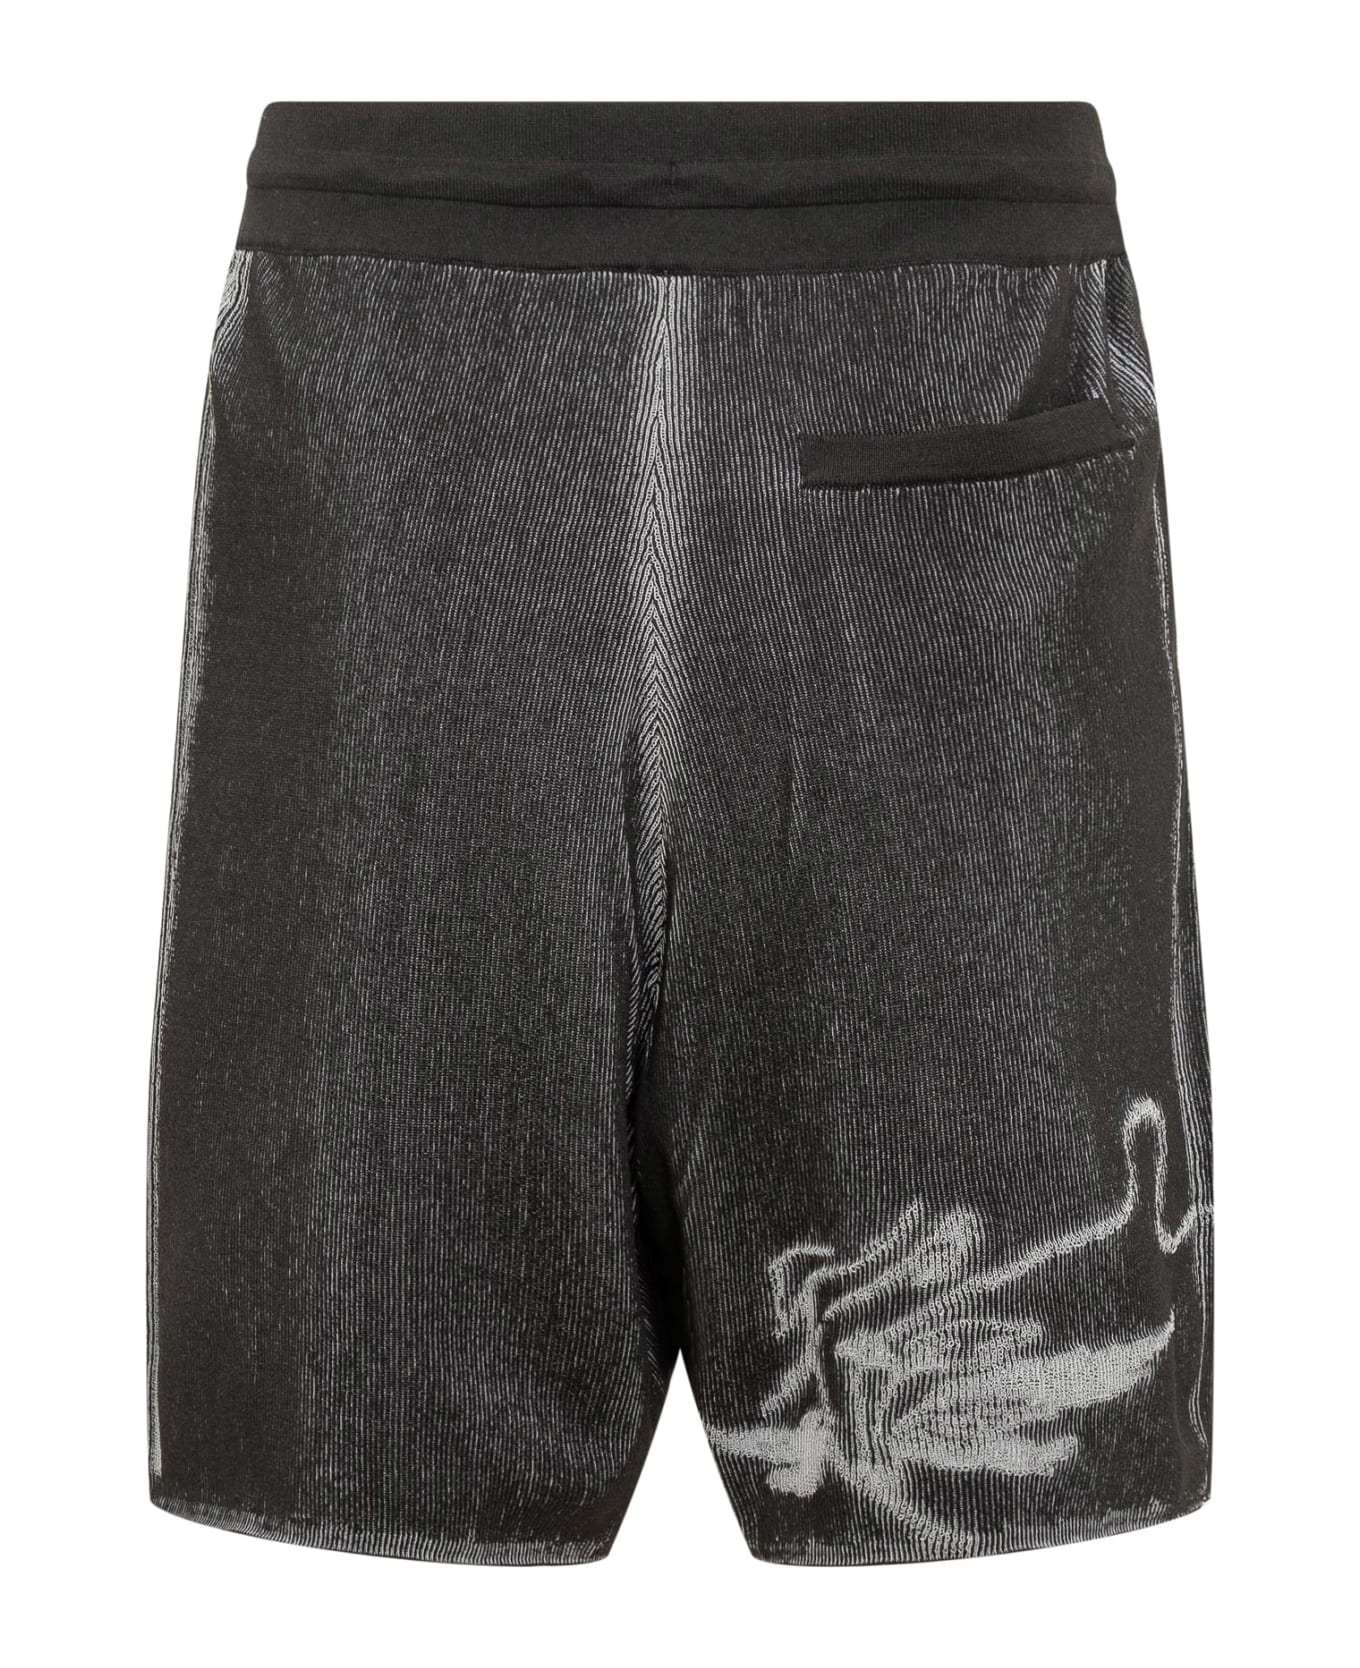 Y-3 Gfx Relaxed Fit Knit Shorts - BLACK/WHITE